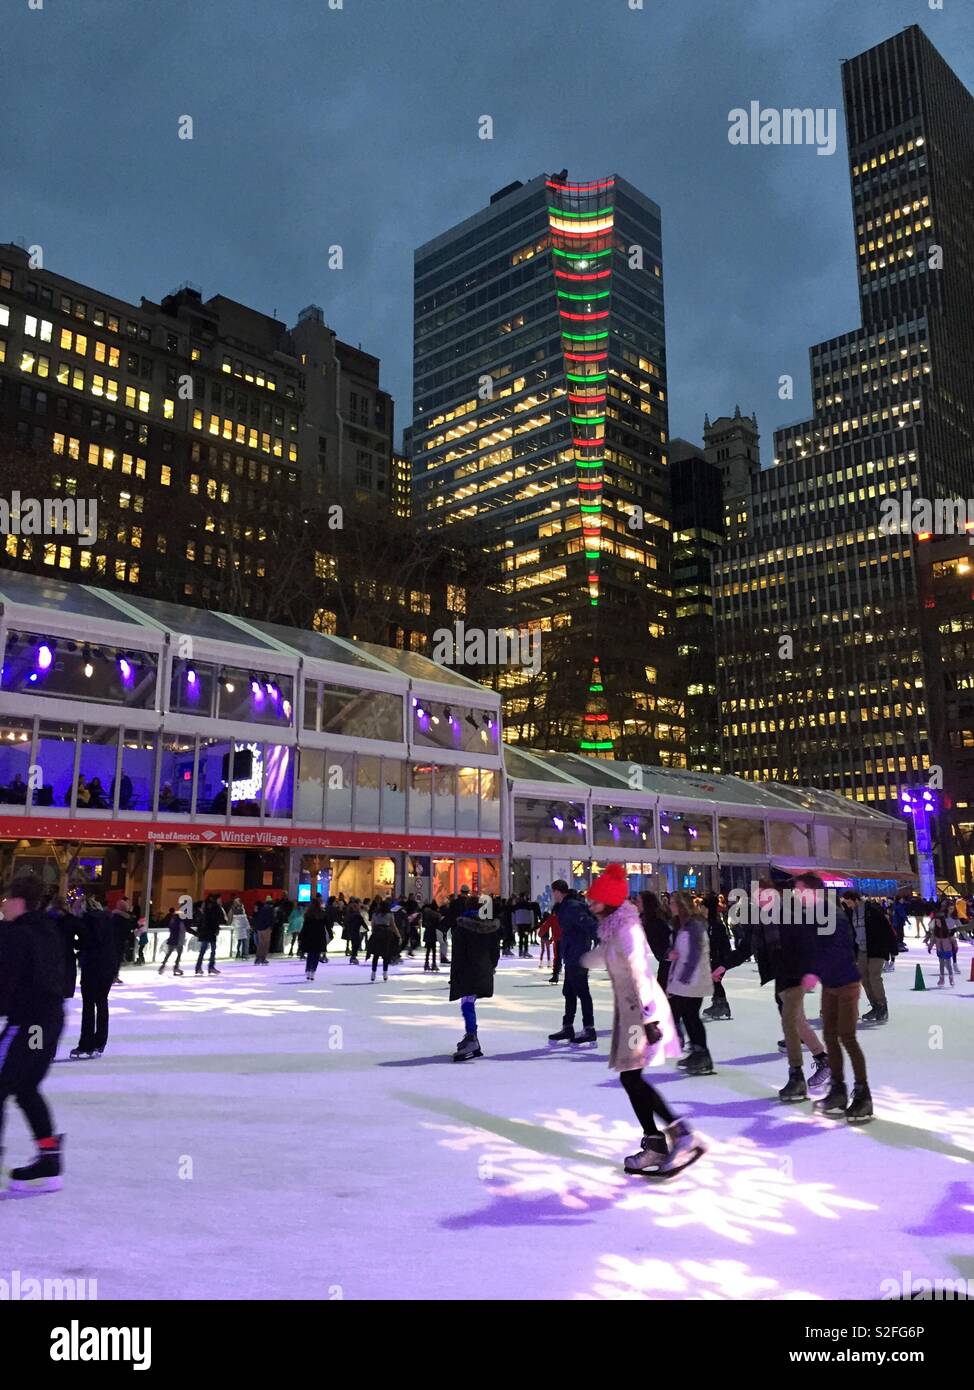 People enjoying the skating rink at Winterfest in Bryant Park during the Christmas season, New York City, USA Stock Photo